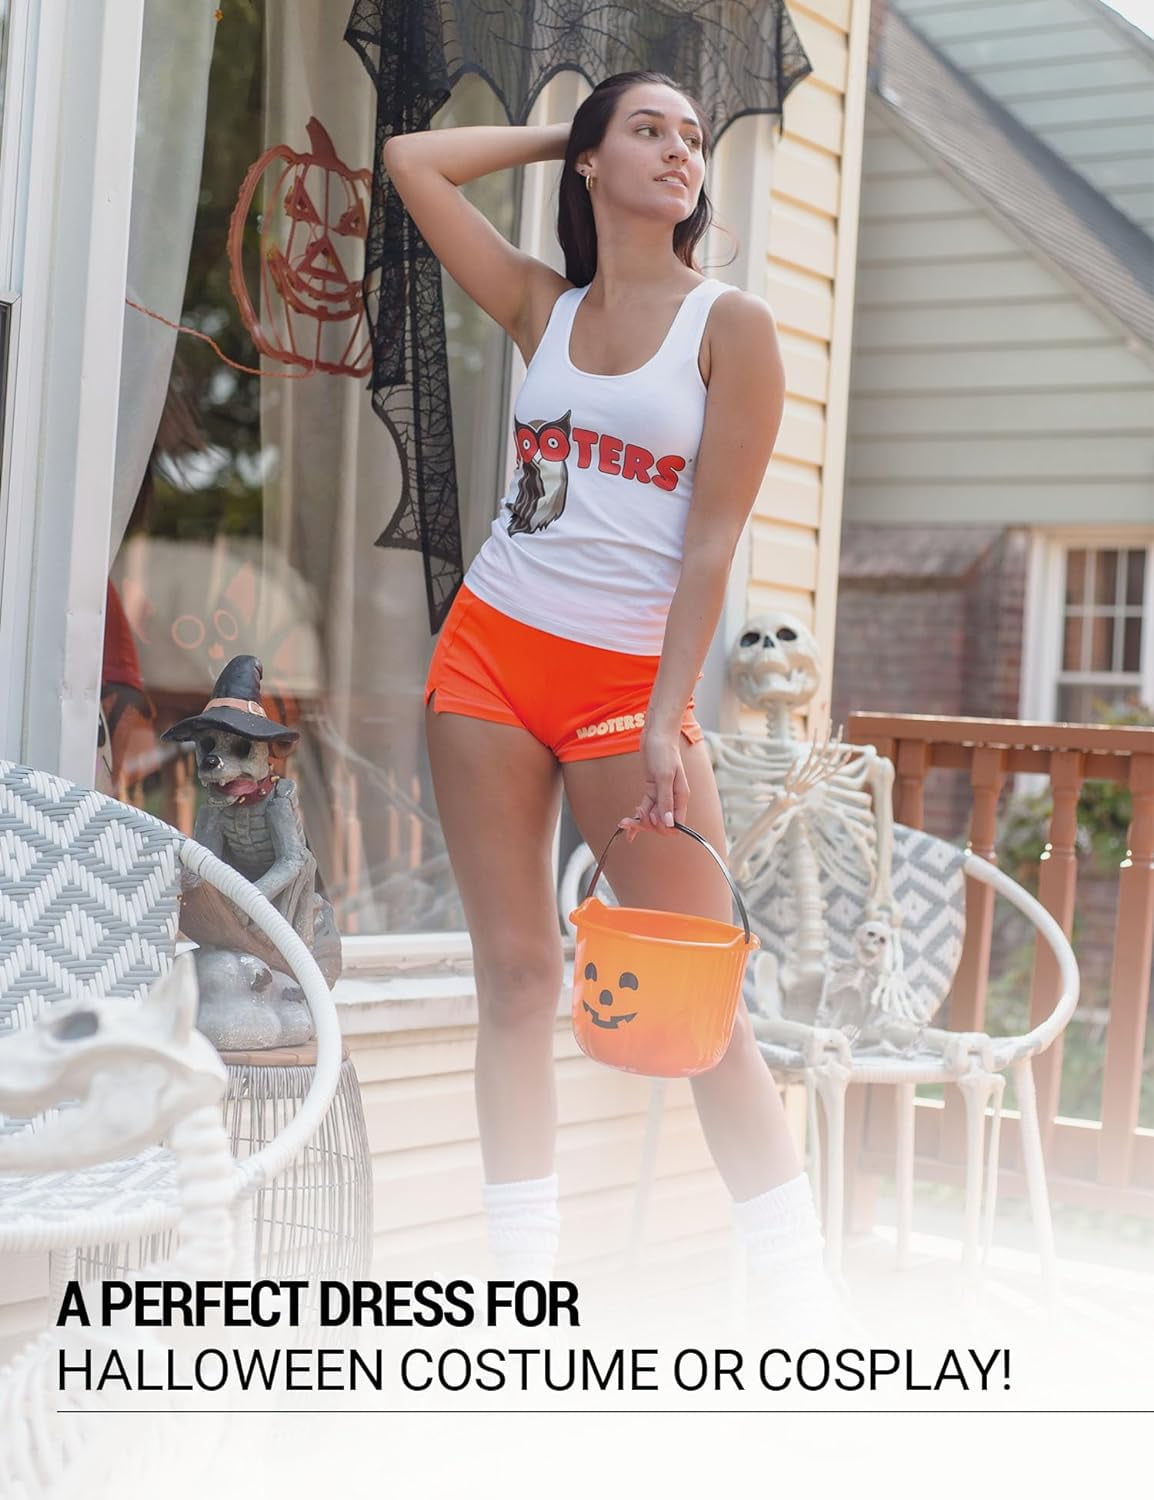 hooters outfit